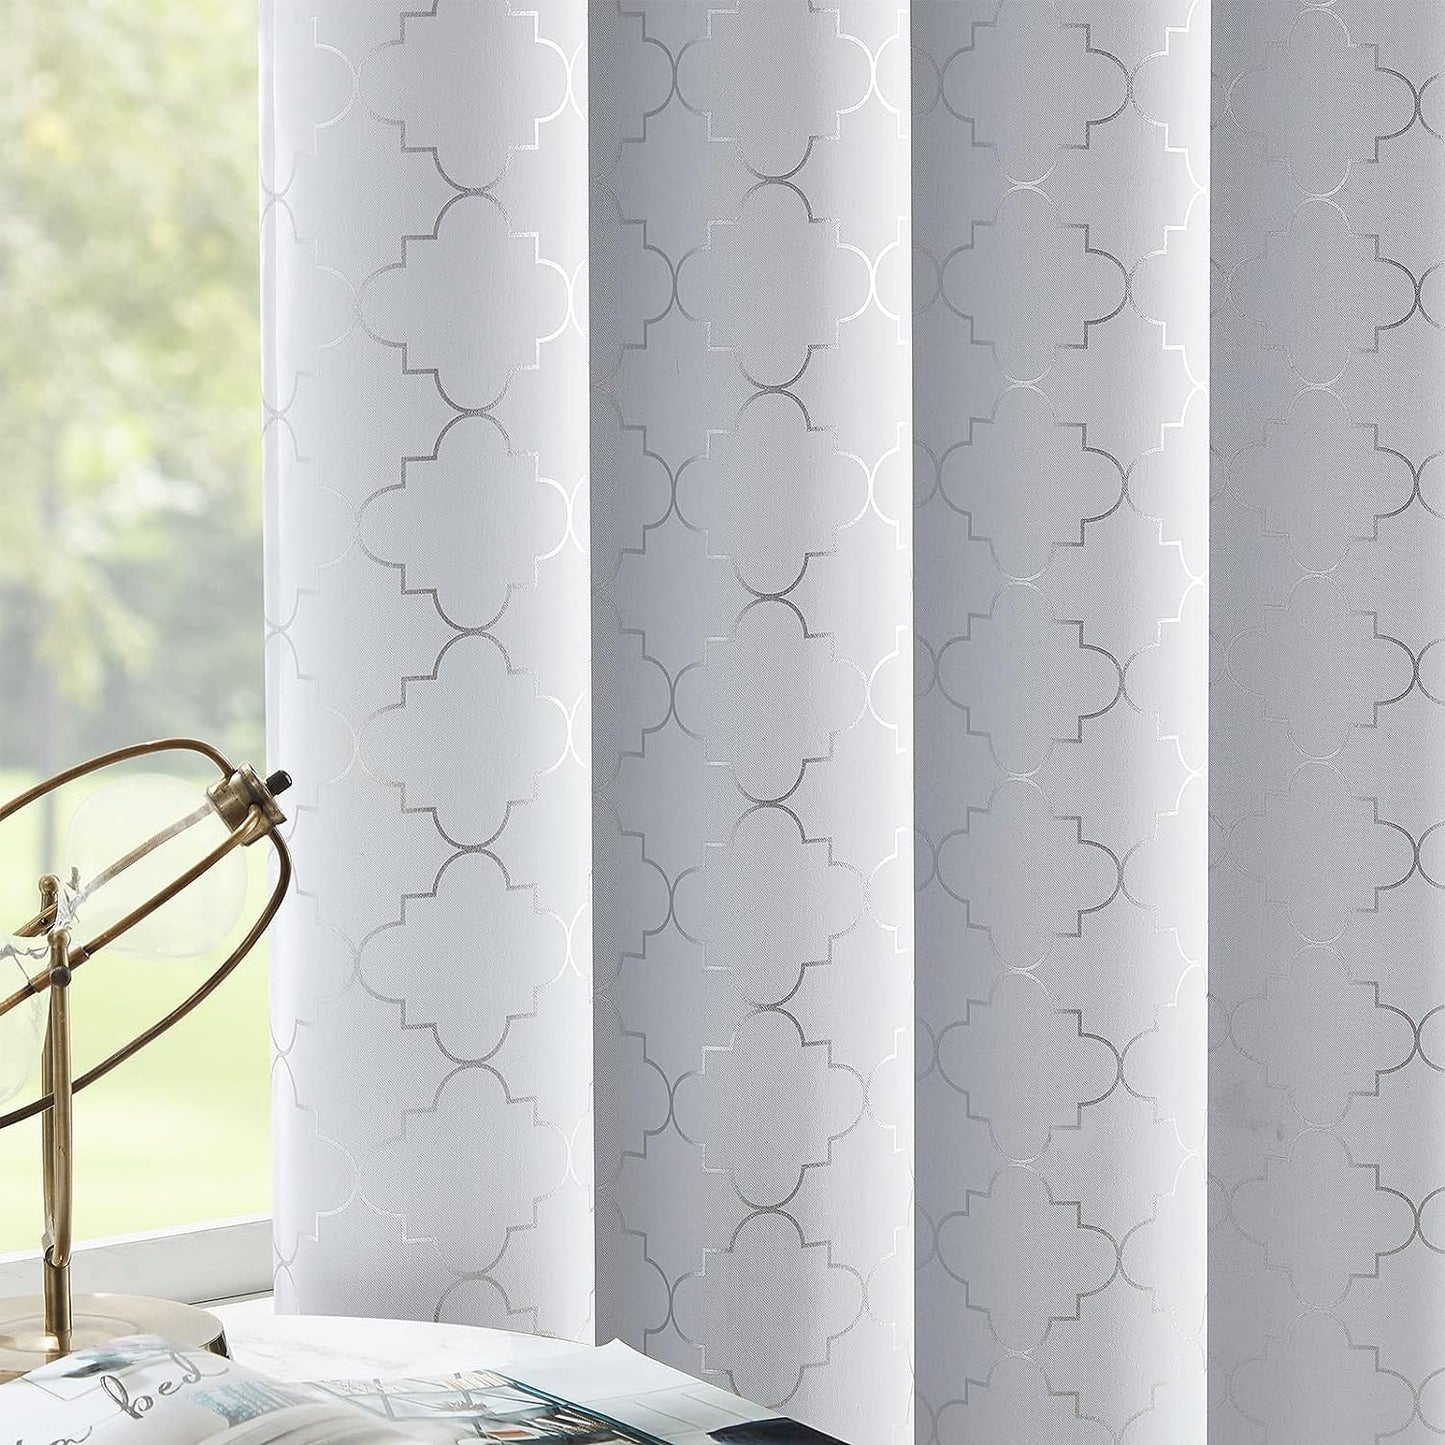 Enactex 100% Full Blackout Curtains 63 Inch Length Thermal Insulated Grey Curtain with Gold Geometric Metallic Pattern, Light Blocking Grommet Window Drapes for Living Room Bedroom, 2 Panels  Enactex Greyish White/Silver W52" X L84" X2 